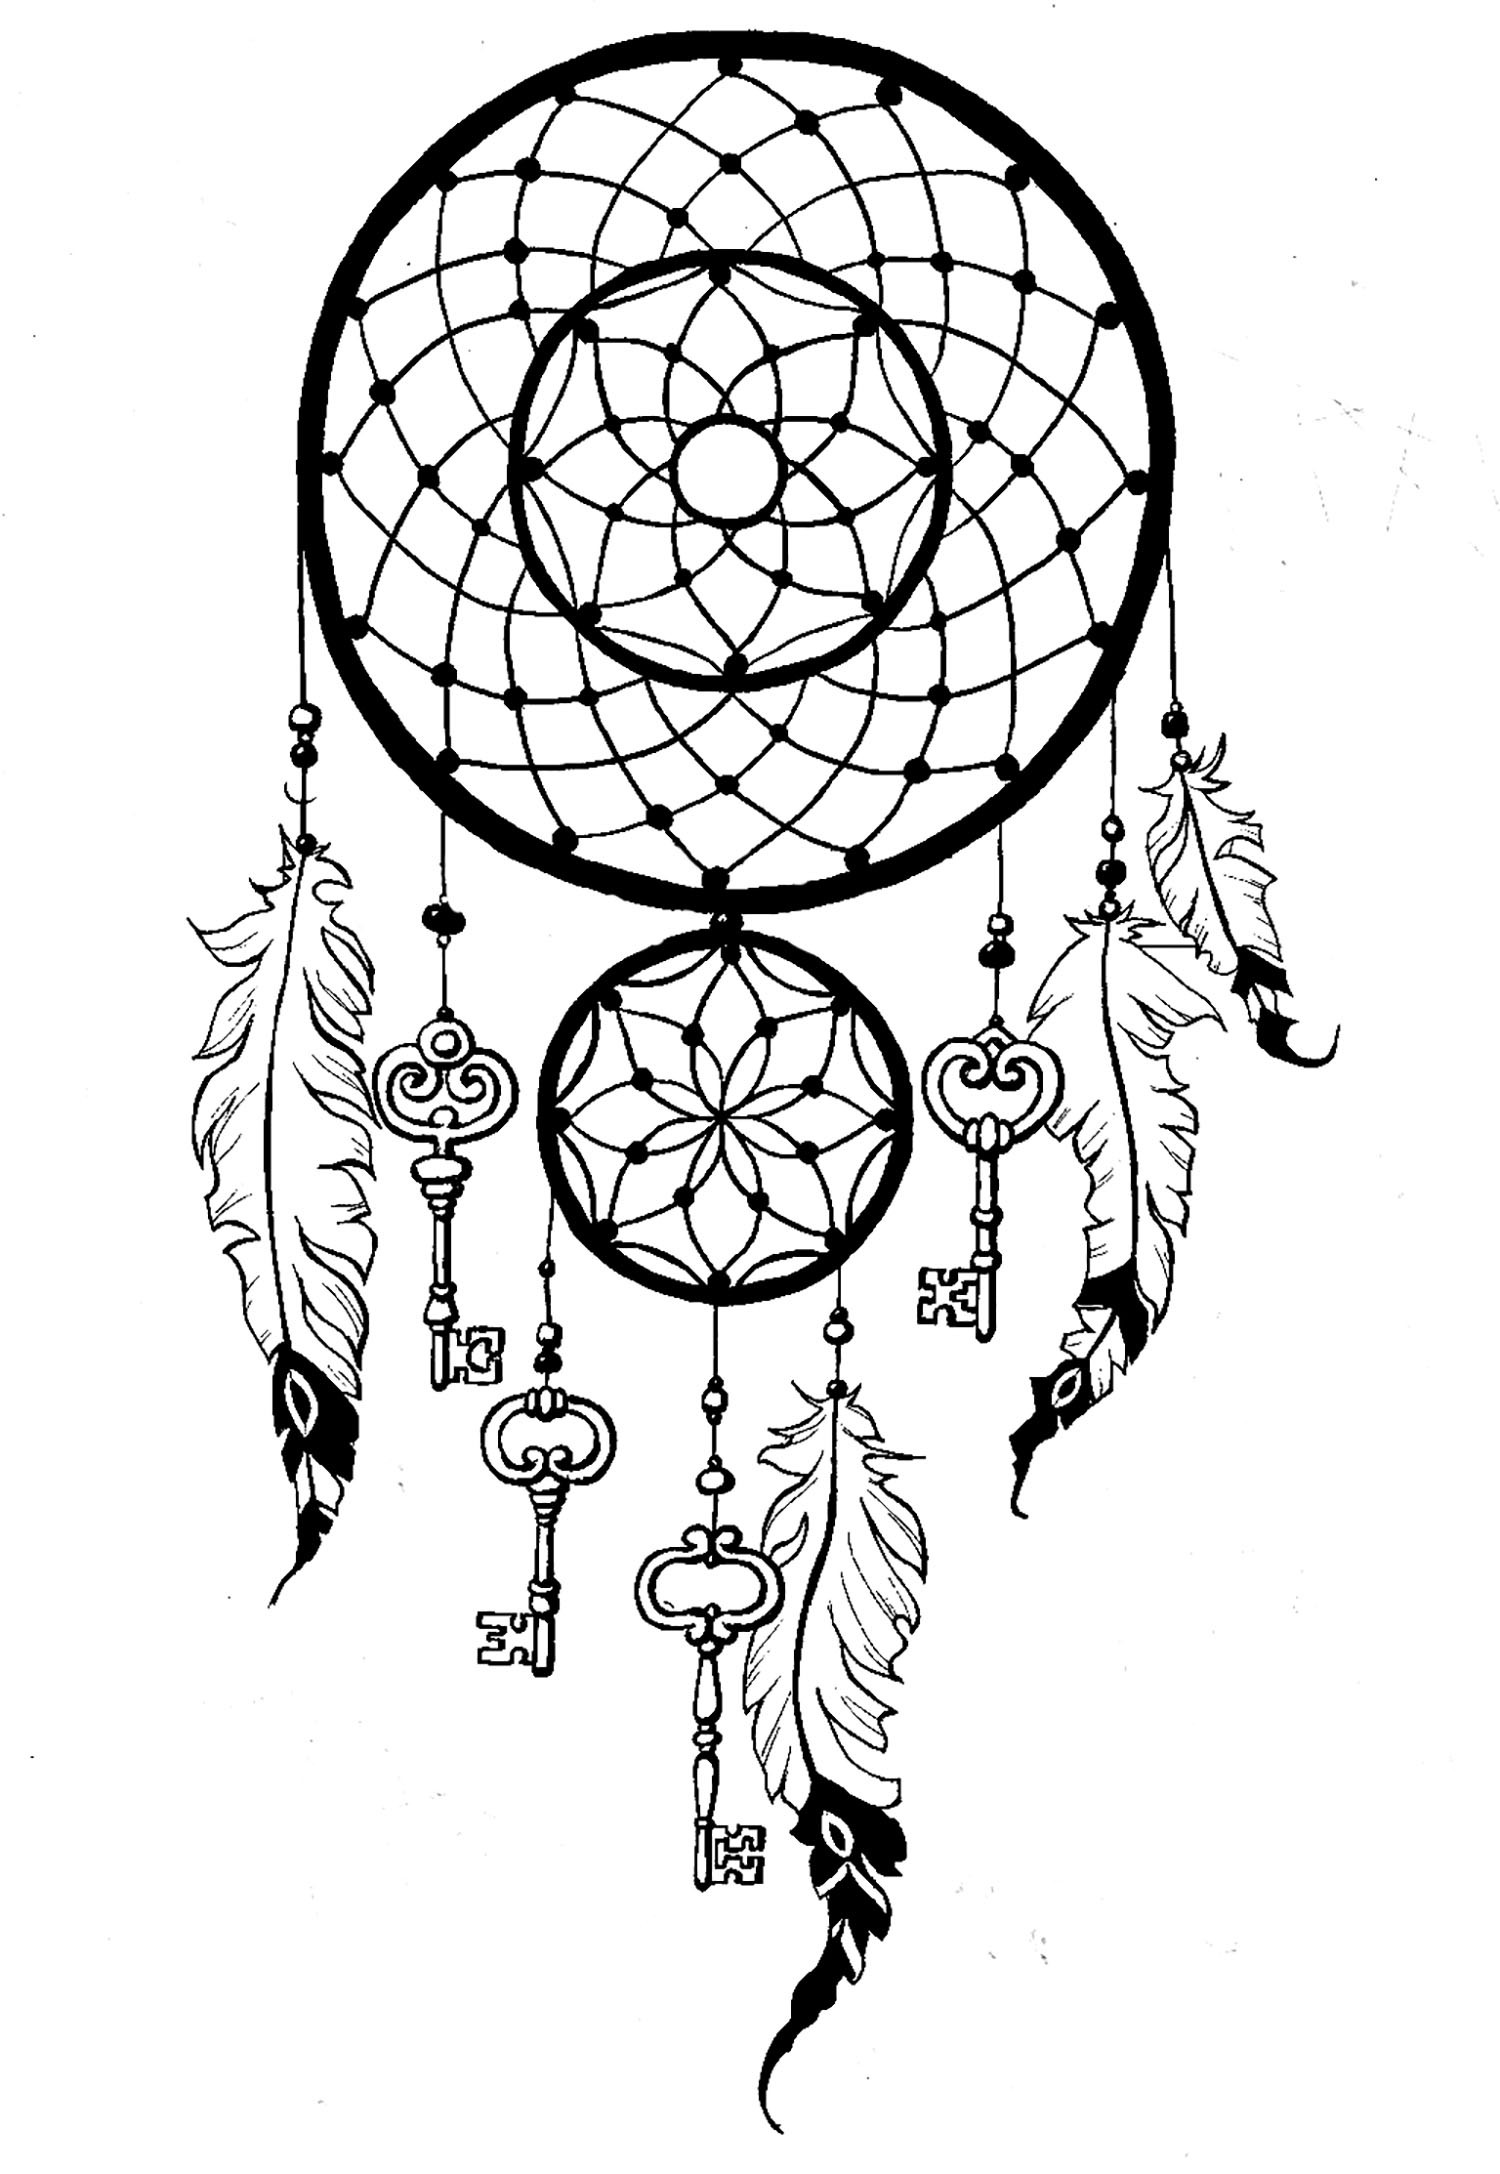 Printable Adult Coloring Pages Dream Catchers
 Dreamcatcher keys Dreamcatchers Adult Coloring Pages